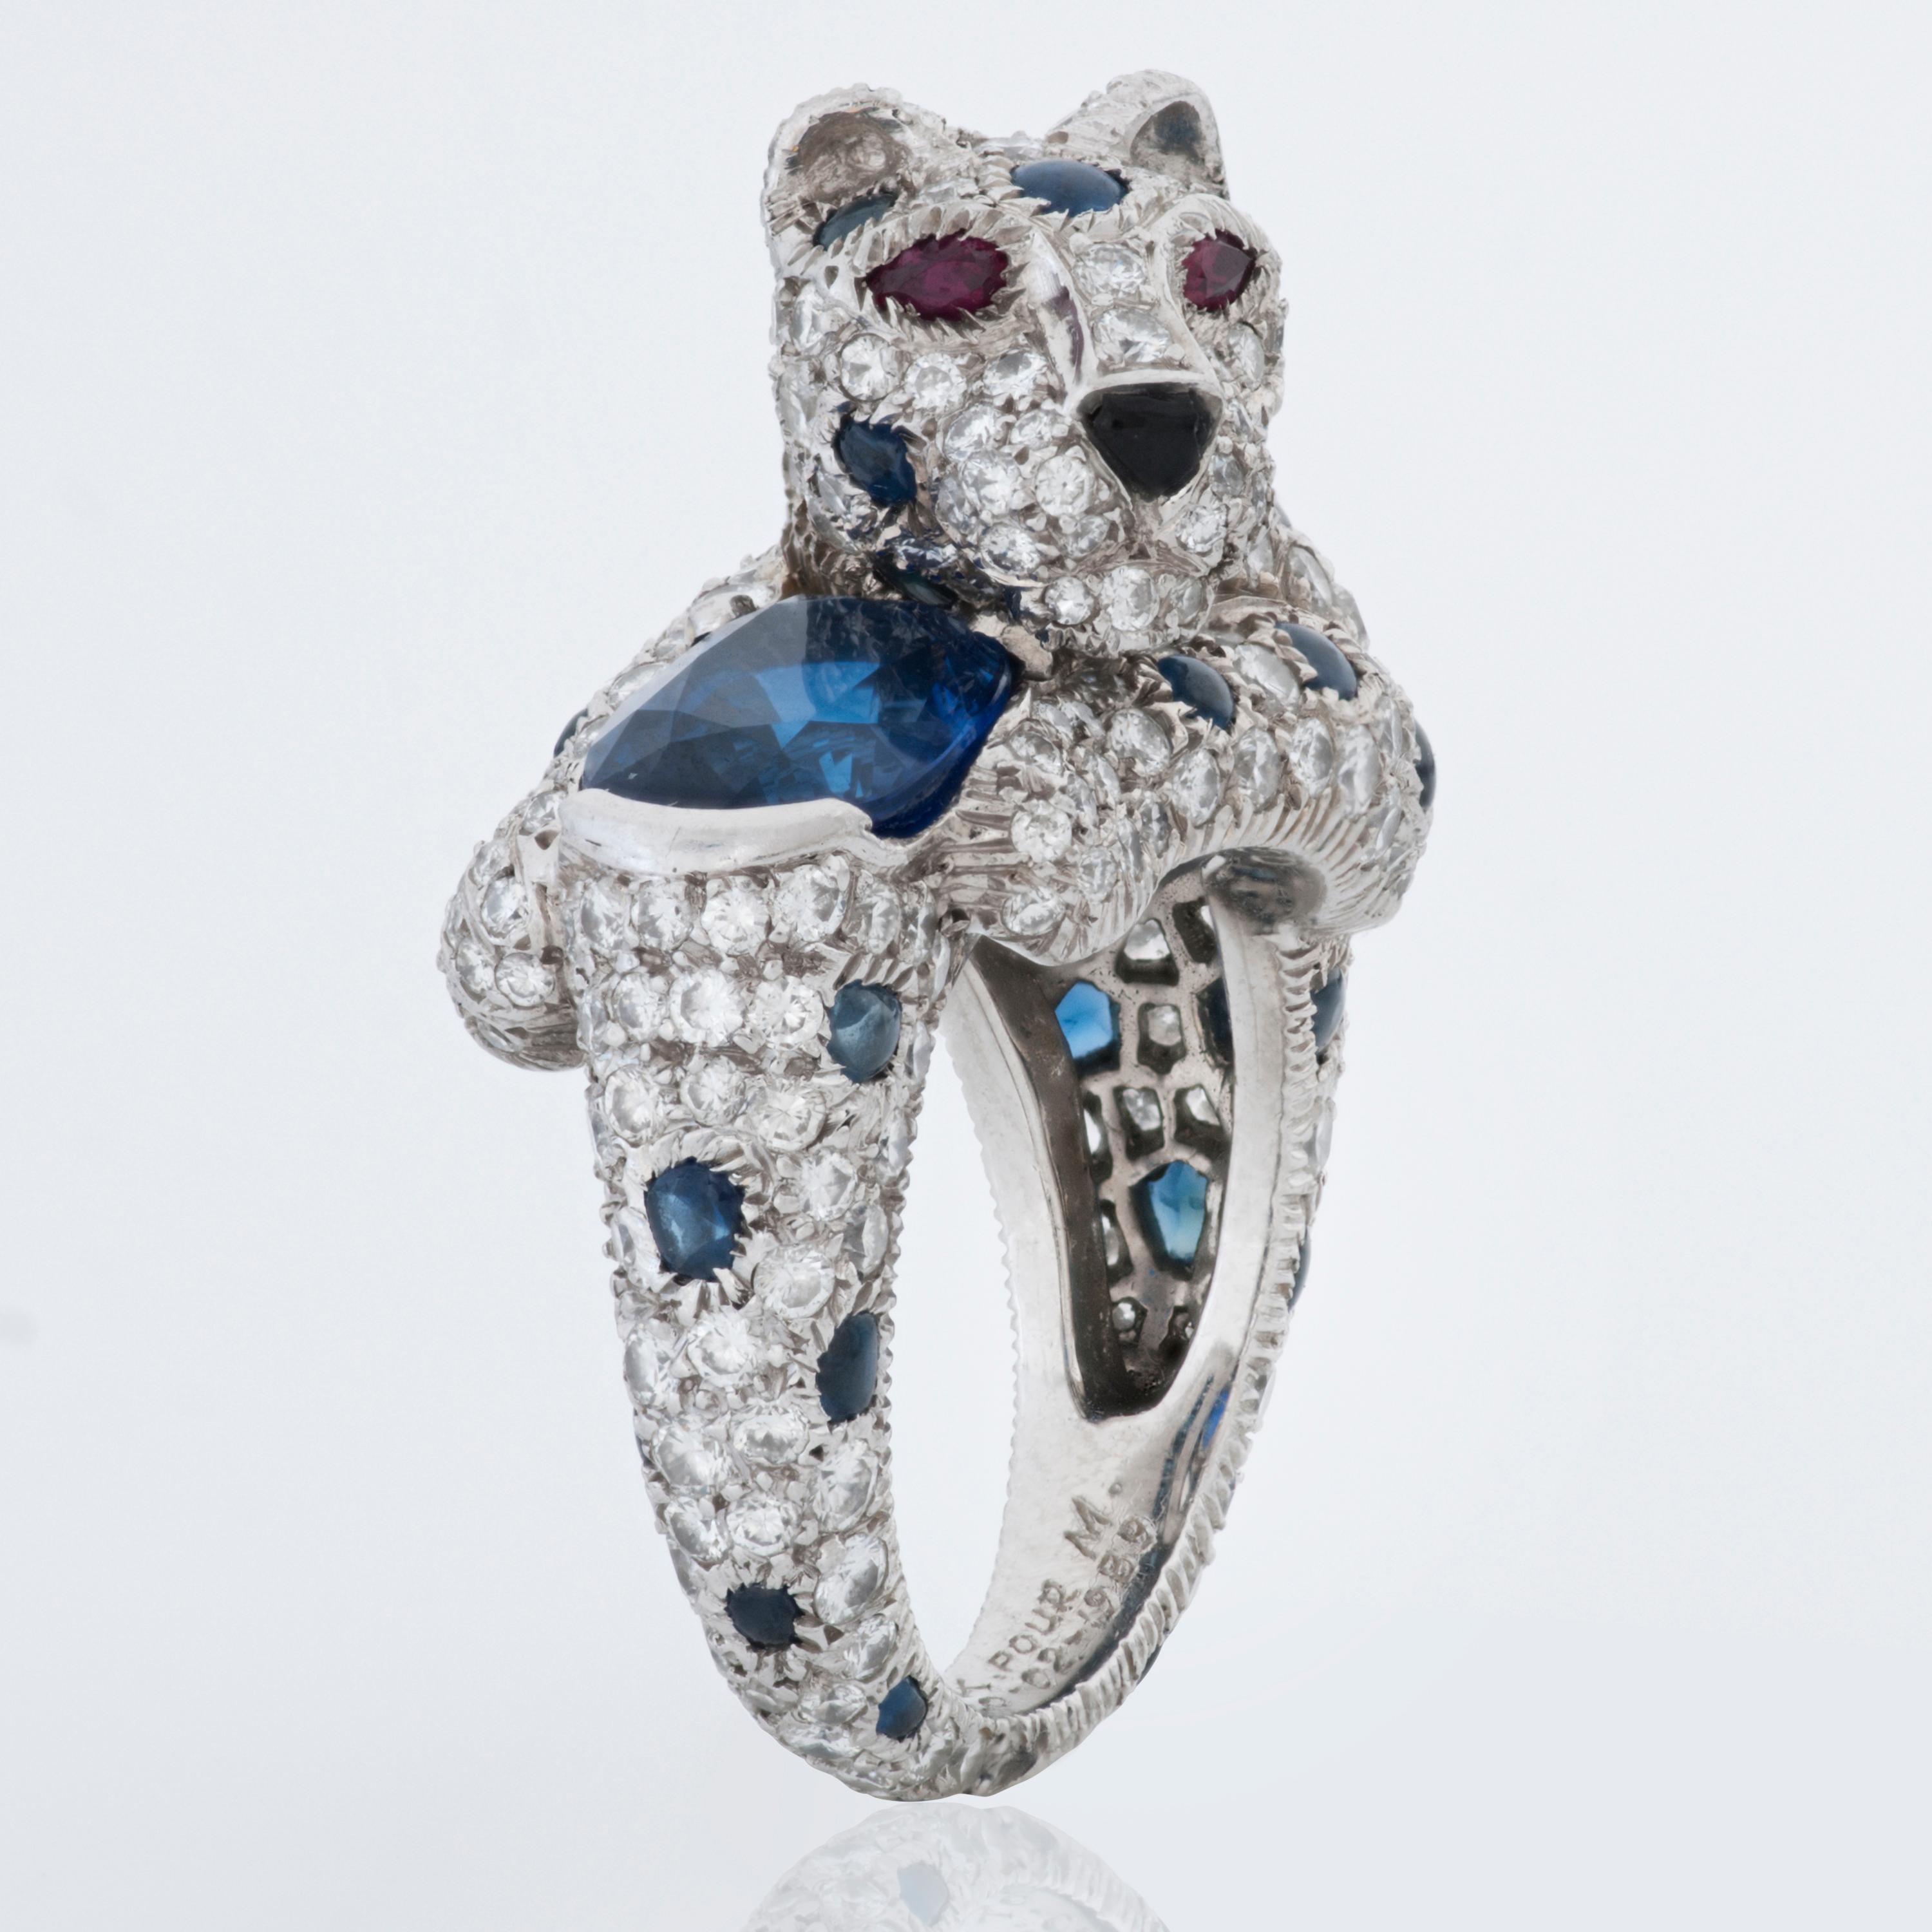 The centerpiece of this Panthere De Cartier ring is a 2.90 carat oval blue sapphire.  It features an additional 42 round cabochon sapphires totaling approximately 2.50 carats, as well as approximately 3.90 carats of round brilliant cut diamonds